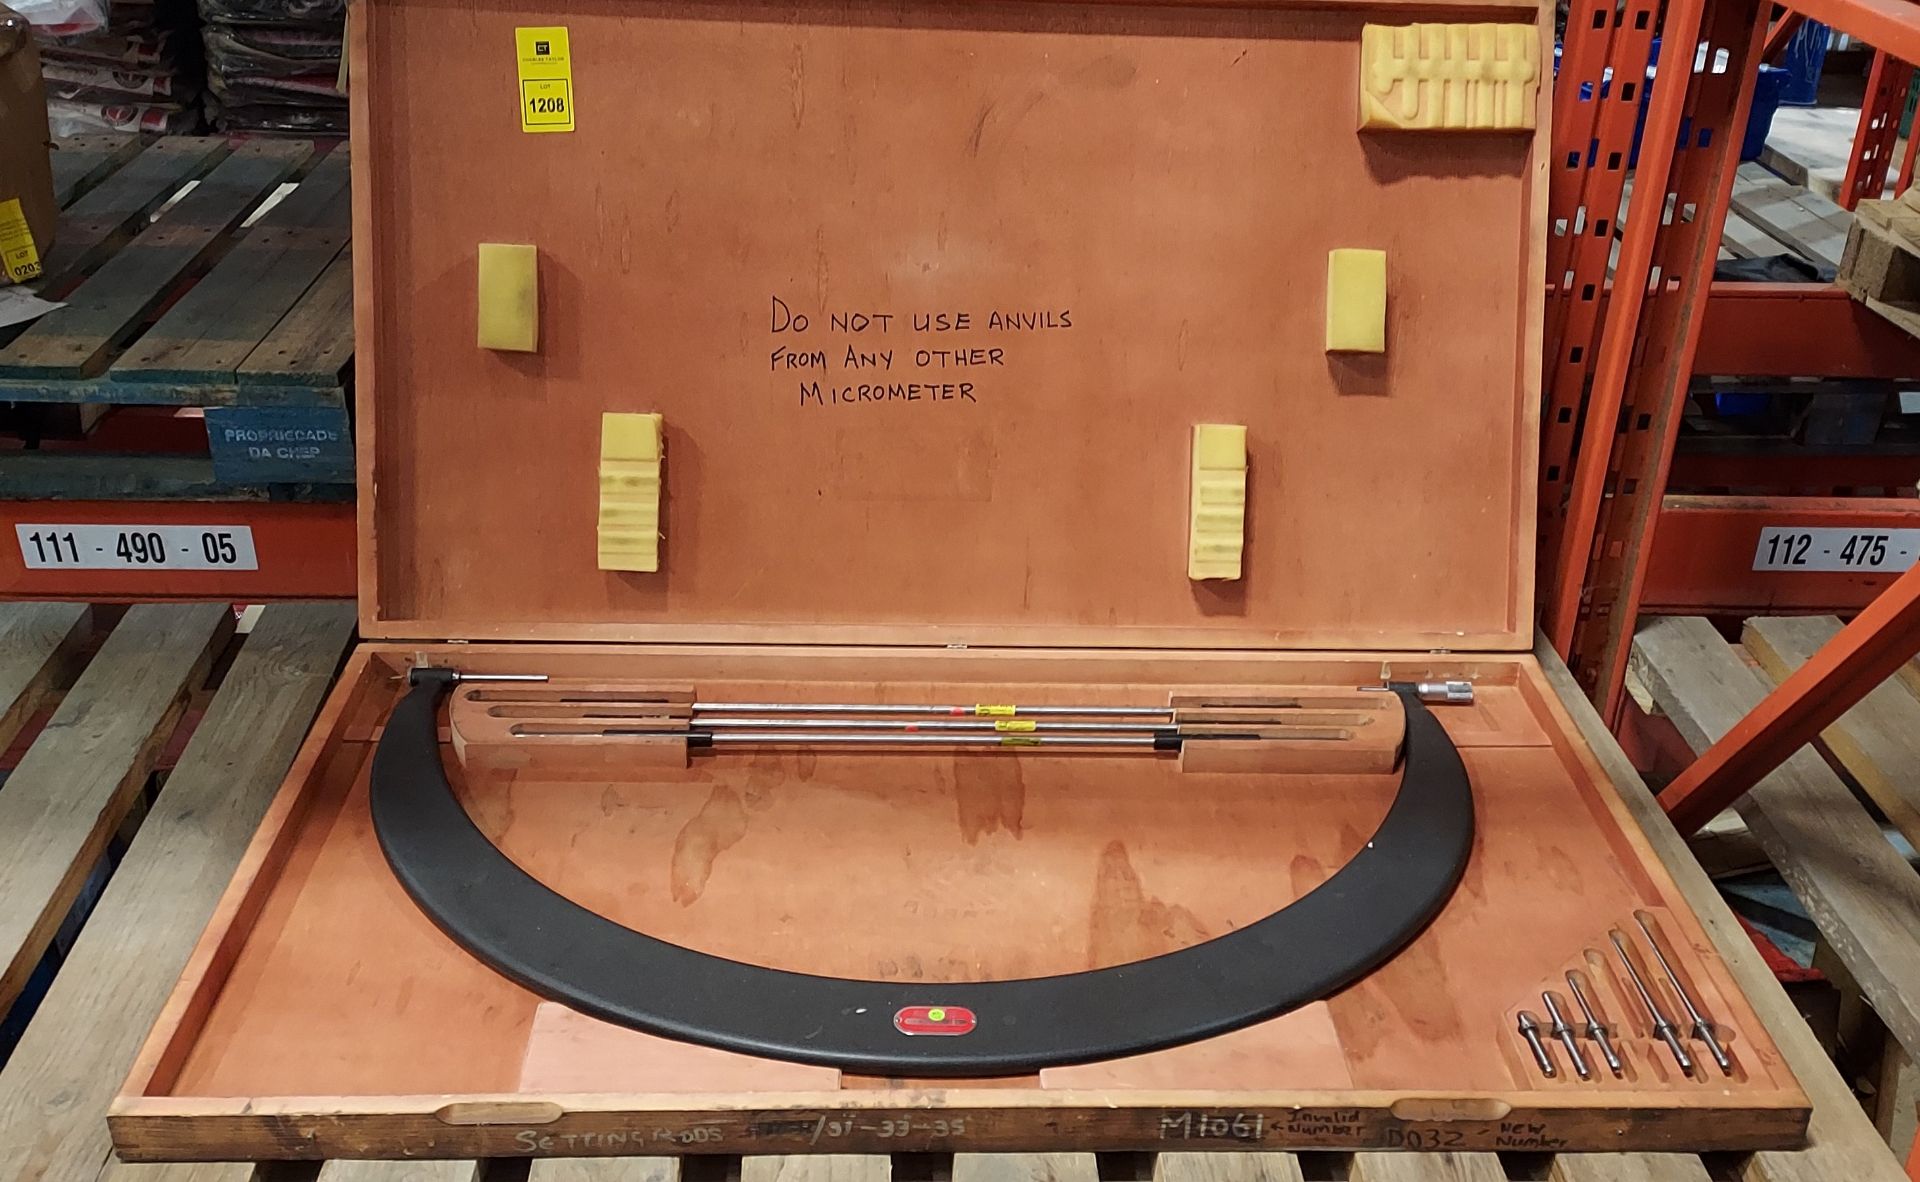 1 X COMPLETE STARRETT NO.724 MICROMETER TO MEASURE LENGTHS FROM 30 TO 36 - WITH CASE - INCLUDES